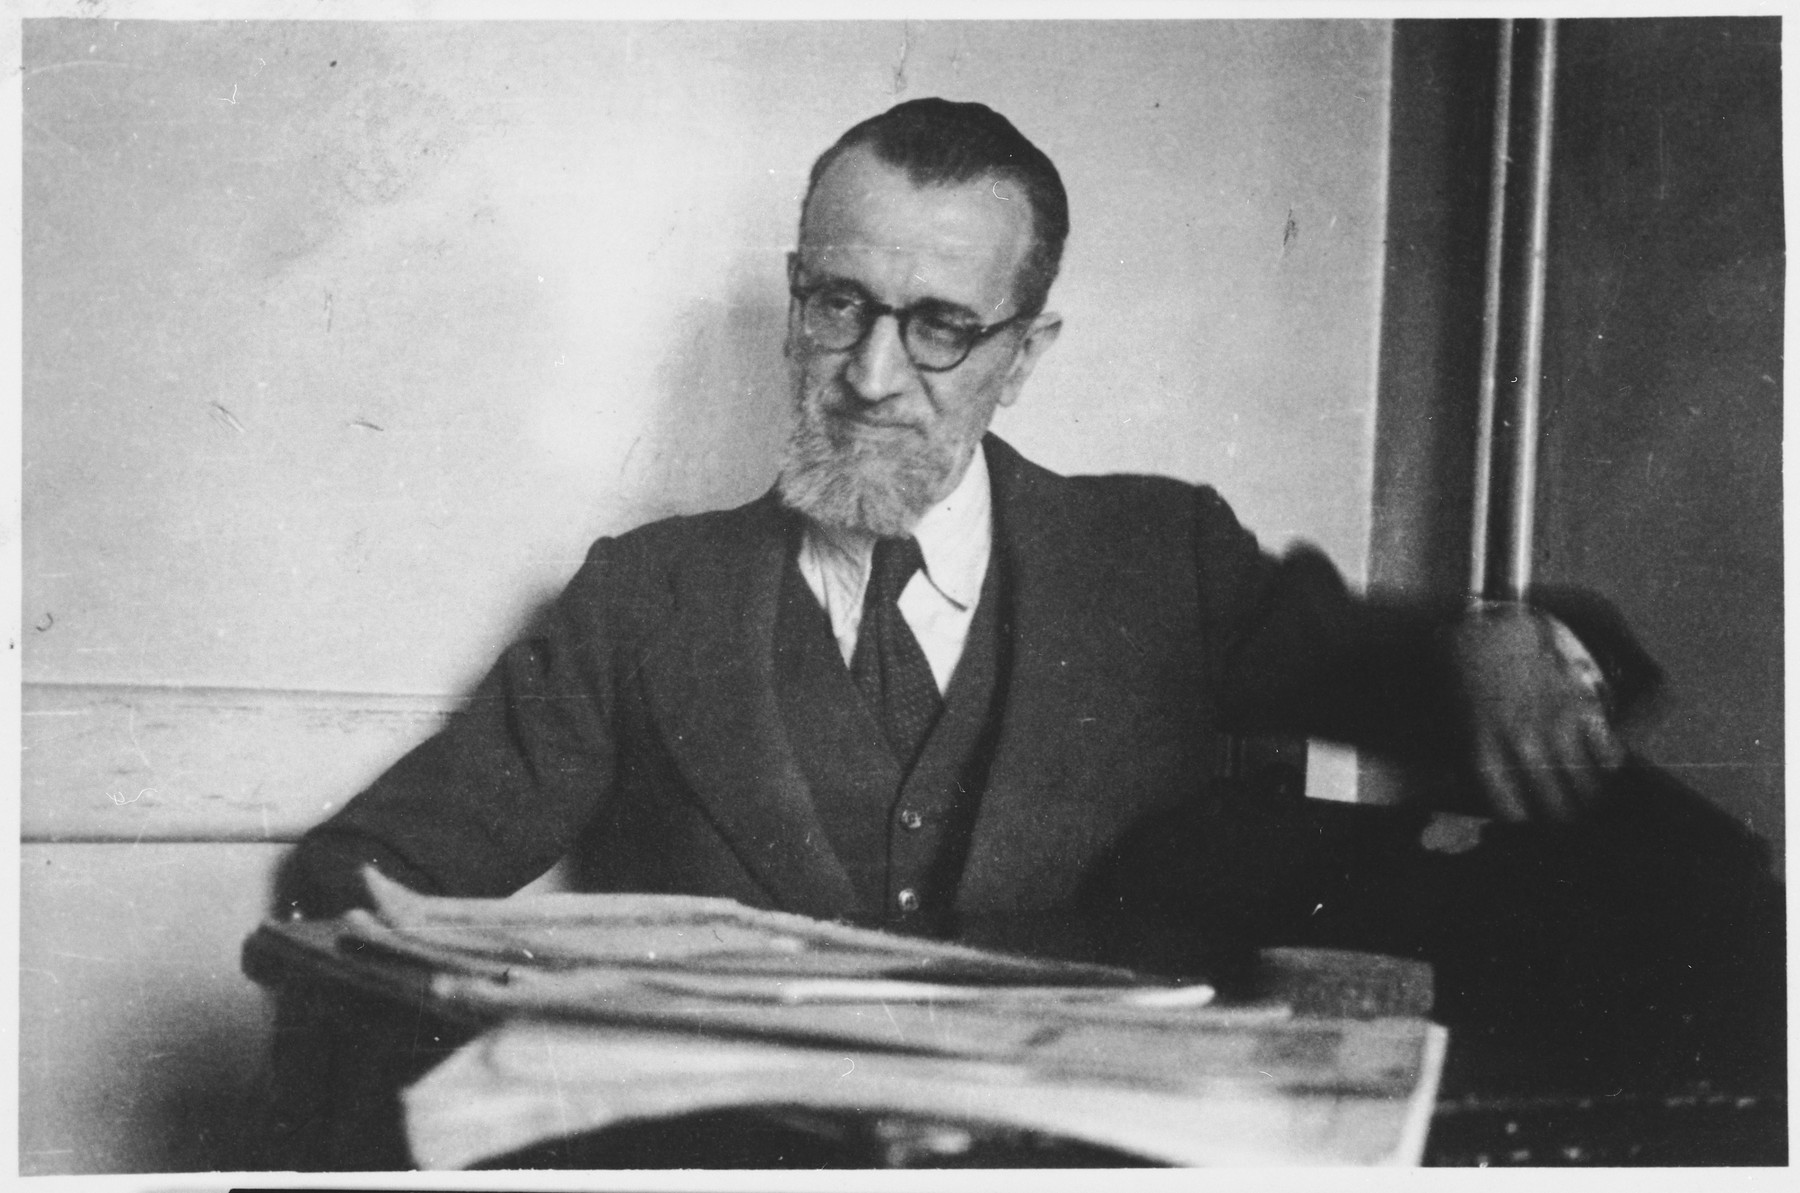 Rabbi Gustavo Castelbolognesi, chief-rabbi of Milan, sits at his desk in the Jewish high school of Milan where he also was a teacher.